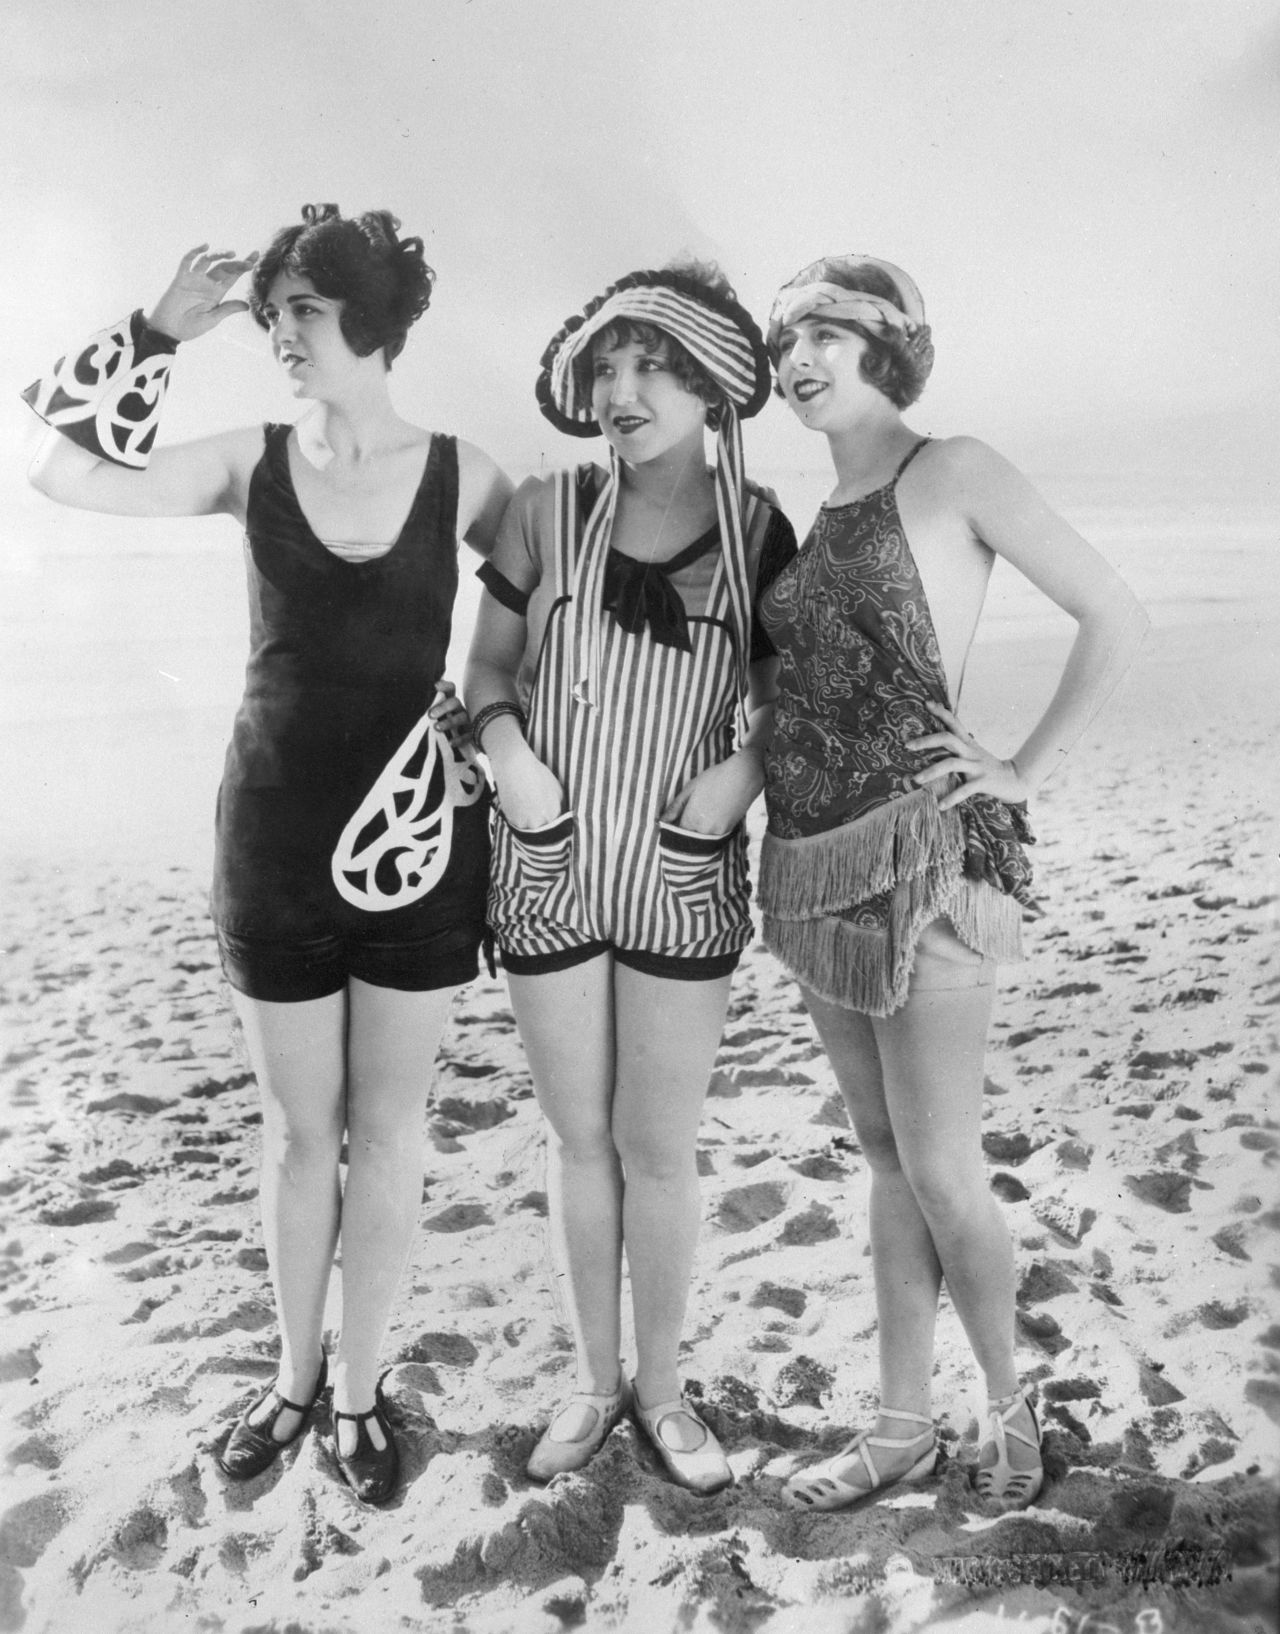 Hollywood helped glamorize bathing suits as early as 1925, with Keystone Studios' "Sennett Bathing Beauties," whose bathing suits were considered provocative.  